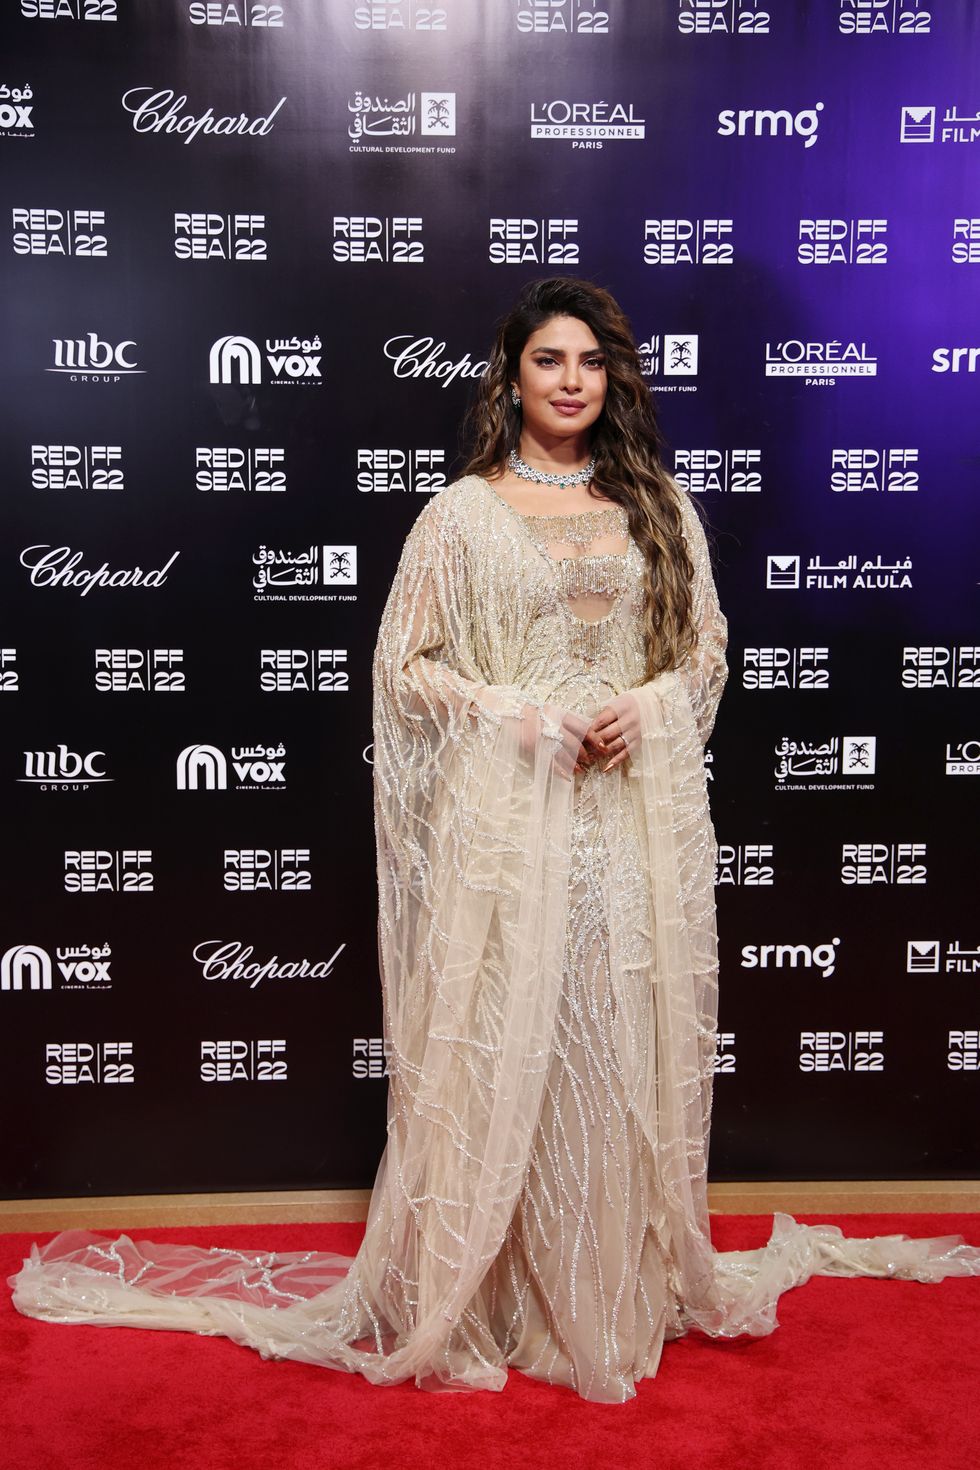 jeddah, saudi arabia   december 01 priyanka chopra attends the opening night gala screening of whats love got to do with it at the red sea international film festival on december 01, 2022 in jeddah, saudi arabia photo by daniele venturelligetty images for the red sea international film festival